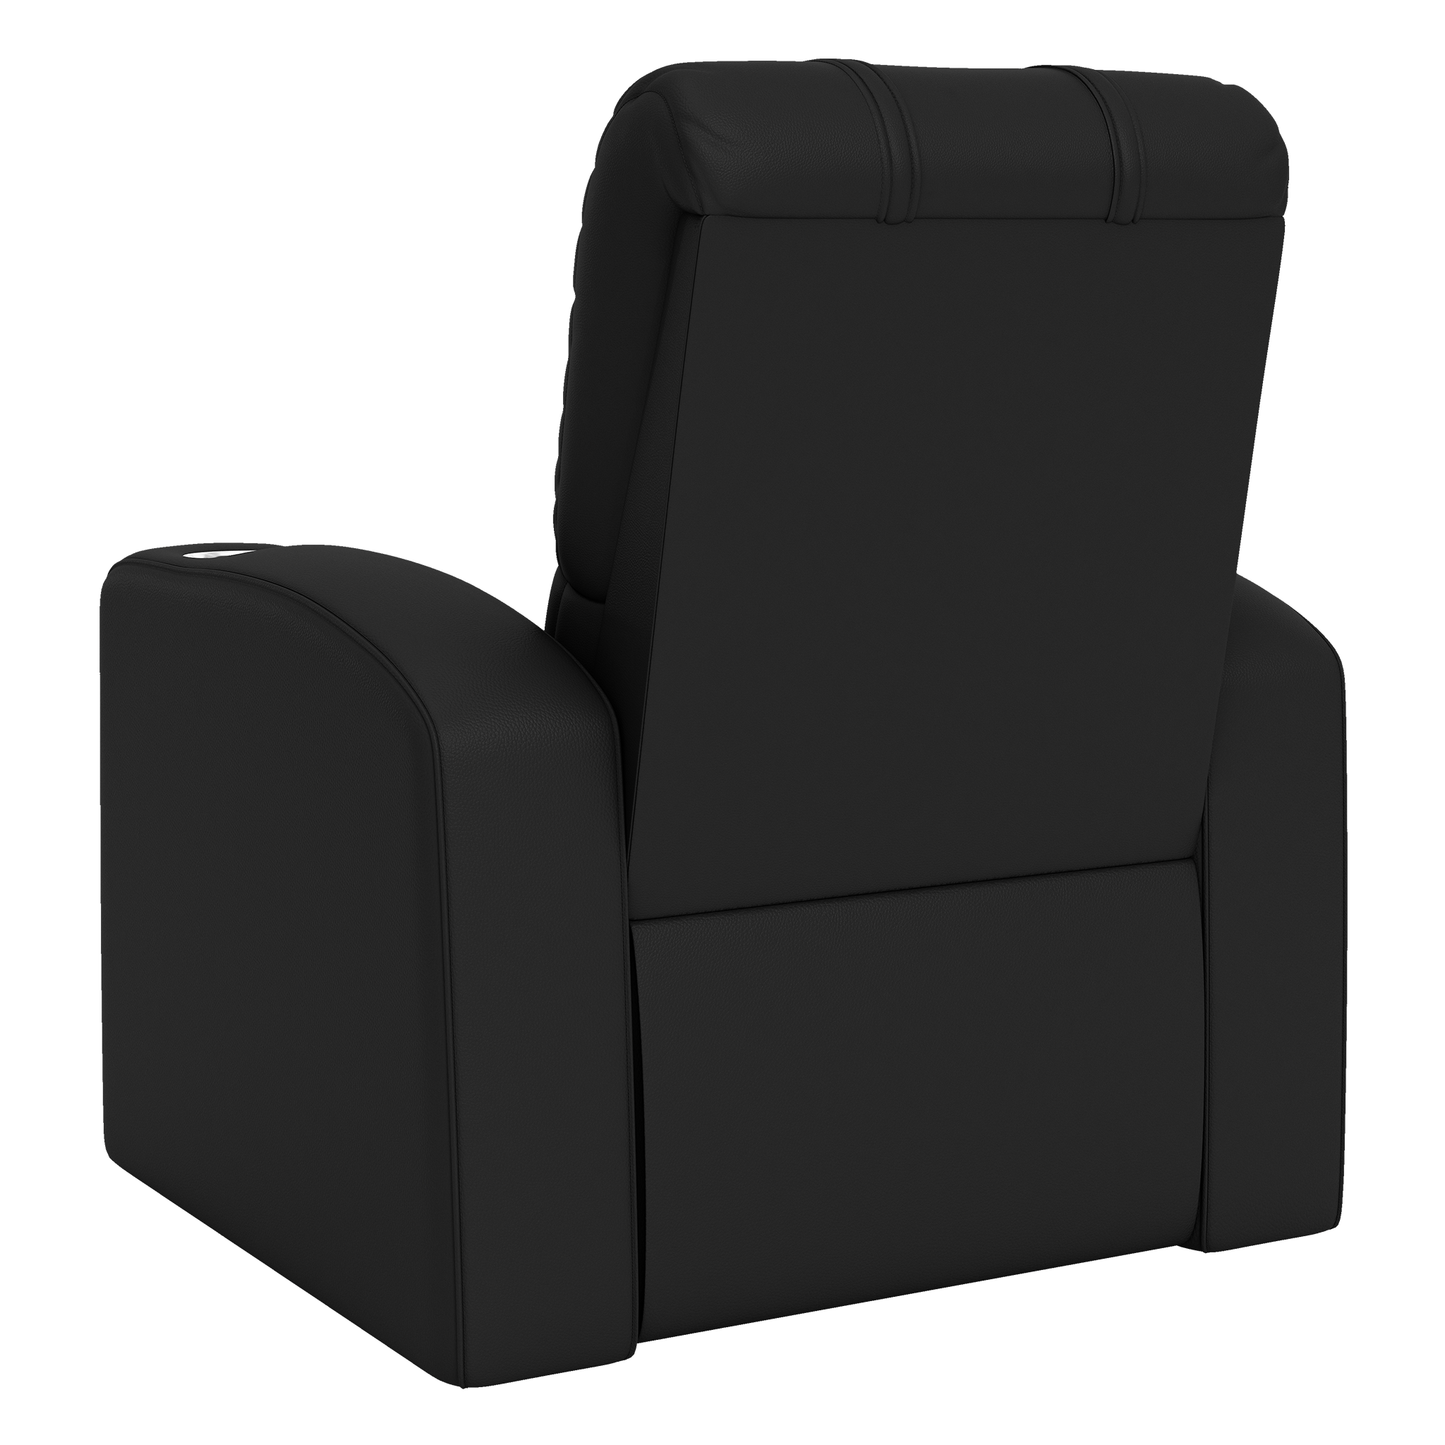 Relax Home Theater Recliner with Minnesota Timberwolves Secondary Logo